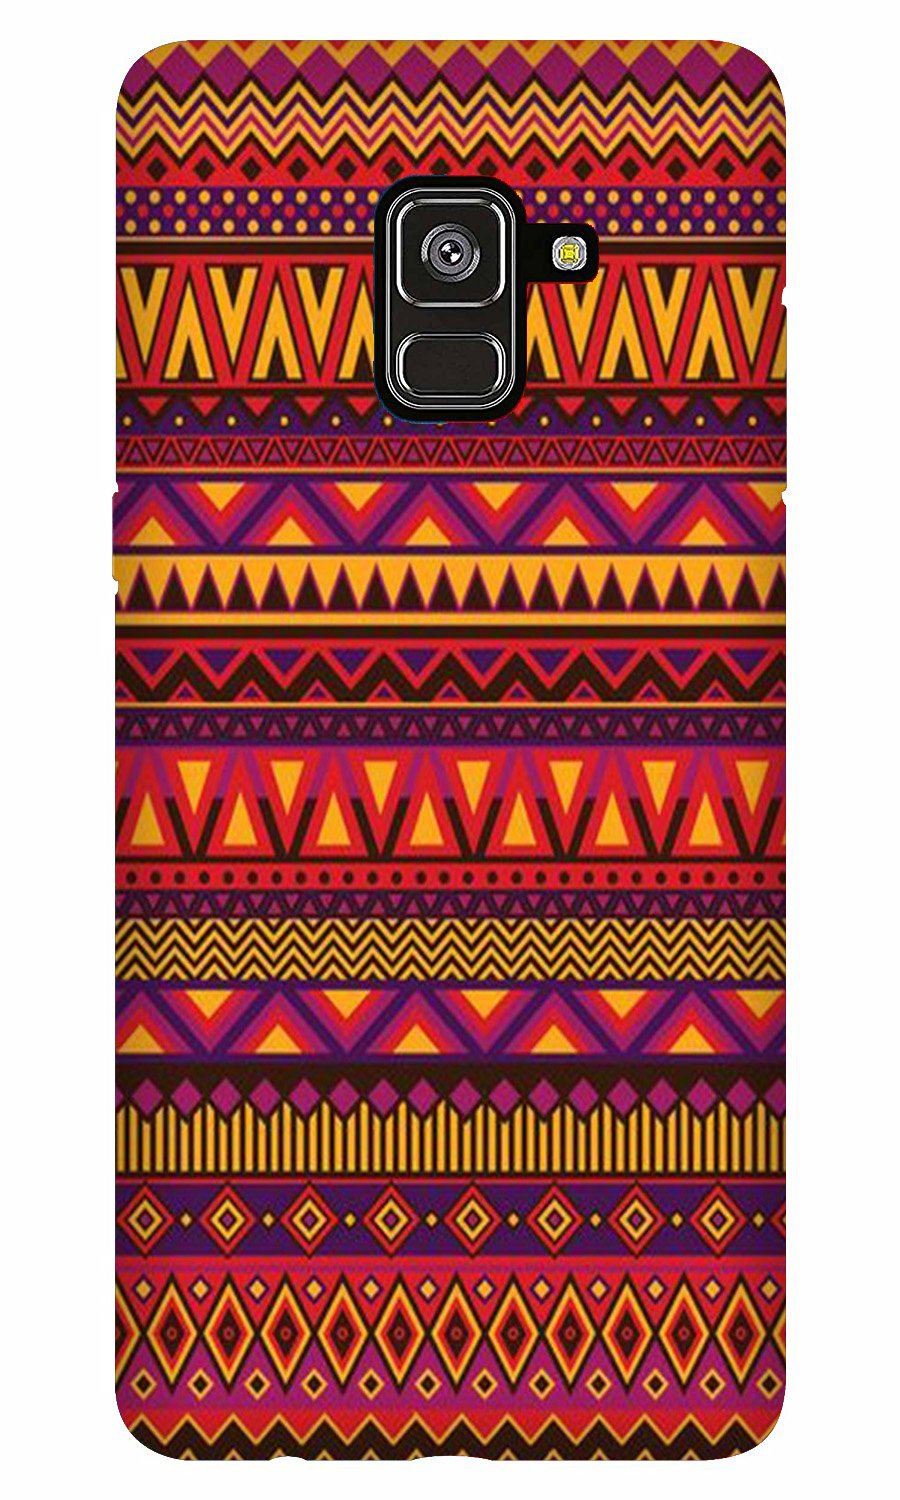 Zigzag line pattern2 Case for Galaxy A8 Plus